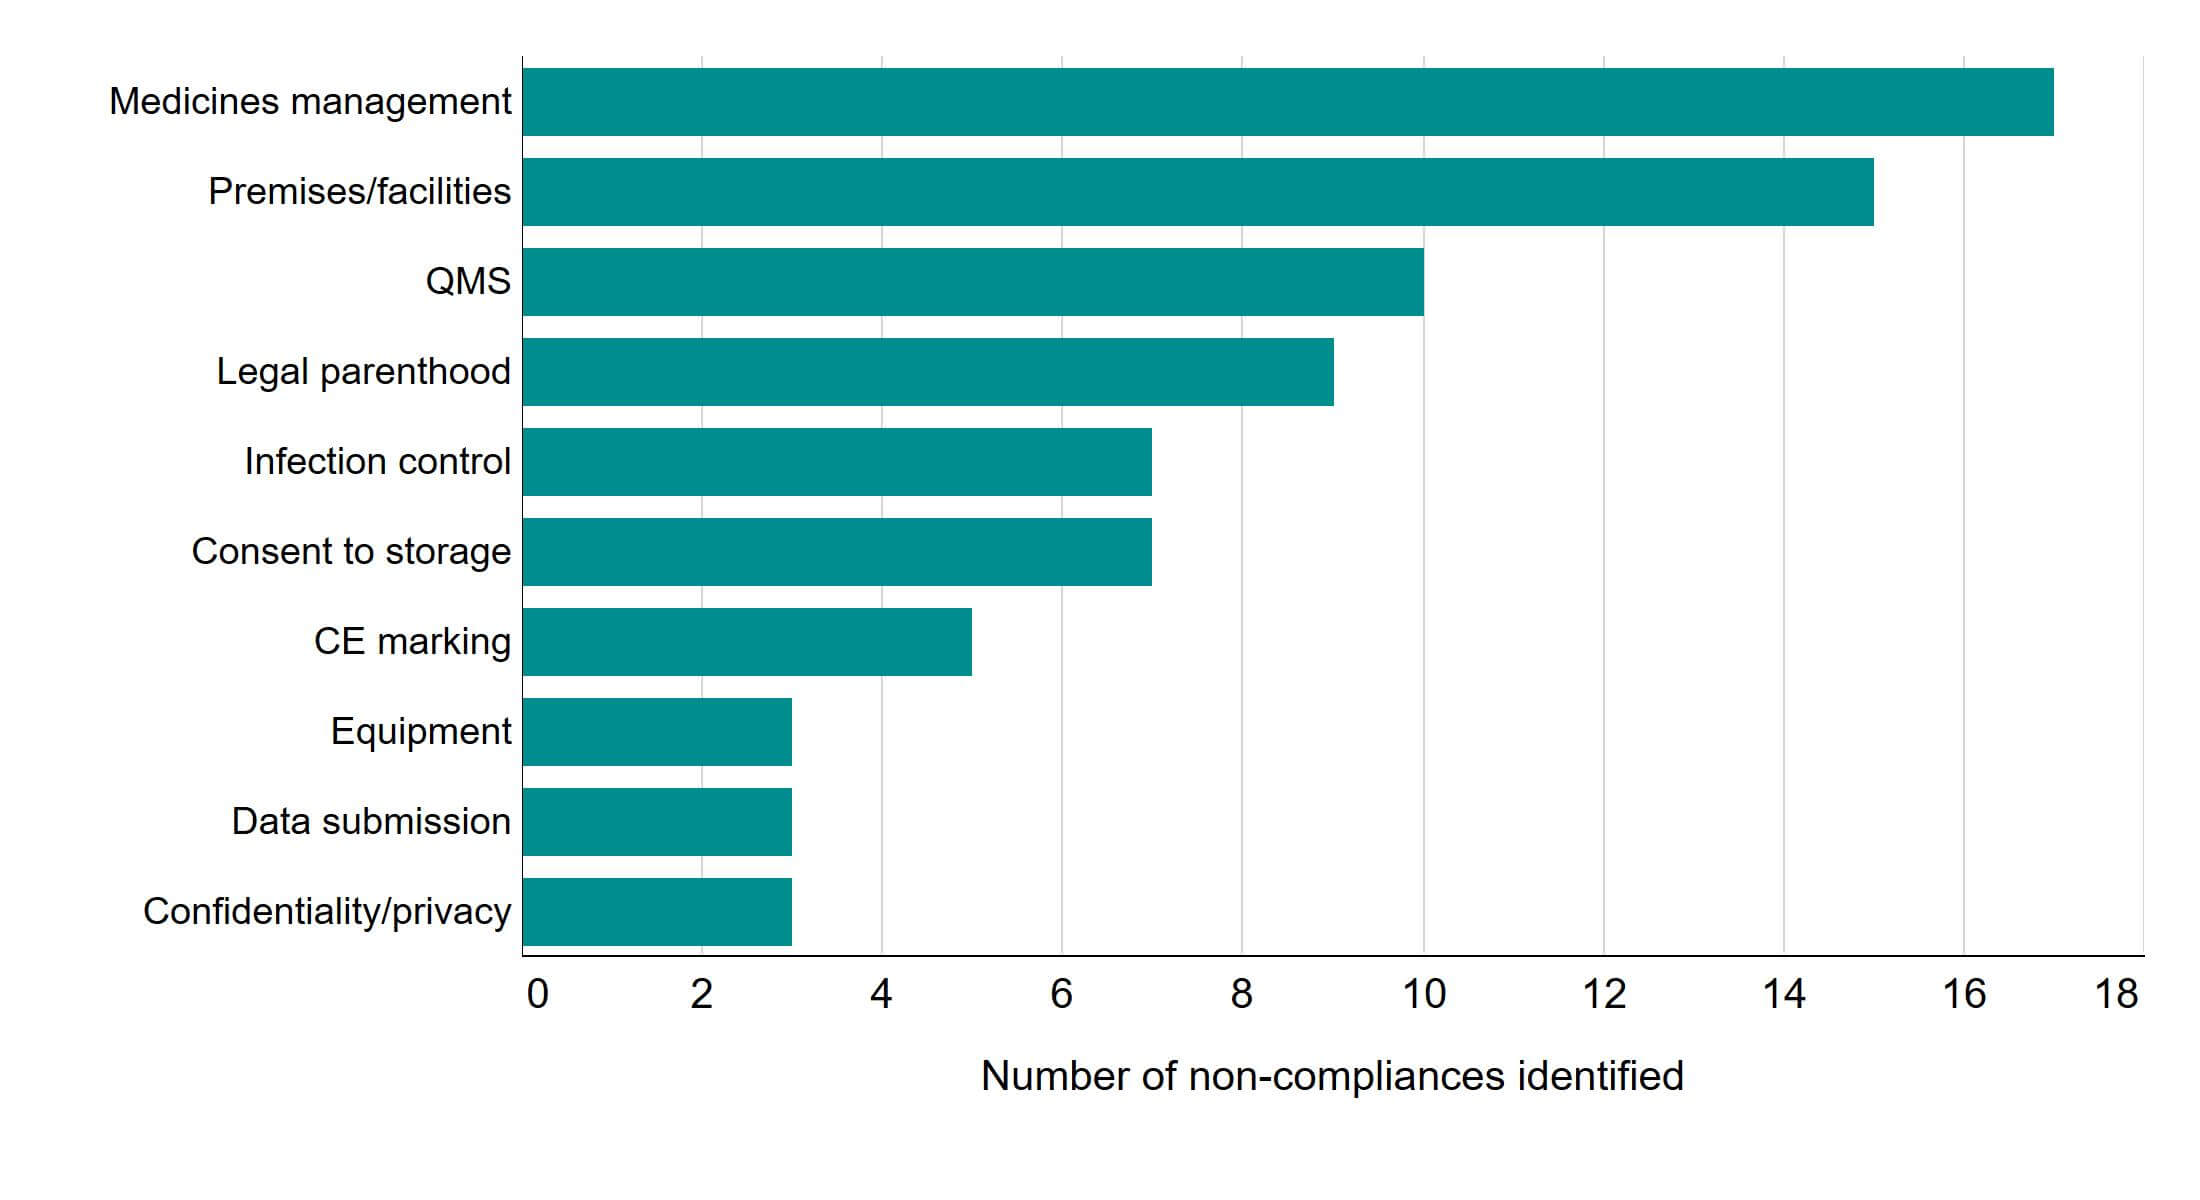 Figure 1: Ten most common areas of non-compliances identified in interim inspections, 2020. Ten most common areas of non-compliances identified in interim inspections, 2020. This bar chart shows the number of non-compliances identified during 33 interim inspections in 2020, grouped by non-compliance type. The three most common types of non-compliance identified were ‘Medicines management’ with 17 non-compliances identified, ‘Premises/facilities’ with 15 non-compliances identified, and ‘QMS’ with 10 non-compliances identified. An accessible form of the underlying data for this figure can be downloaded at the start of the report in .xls format.